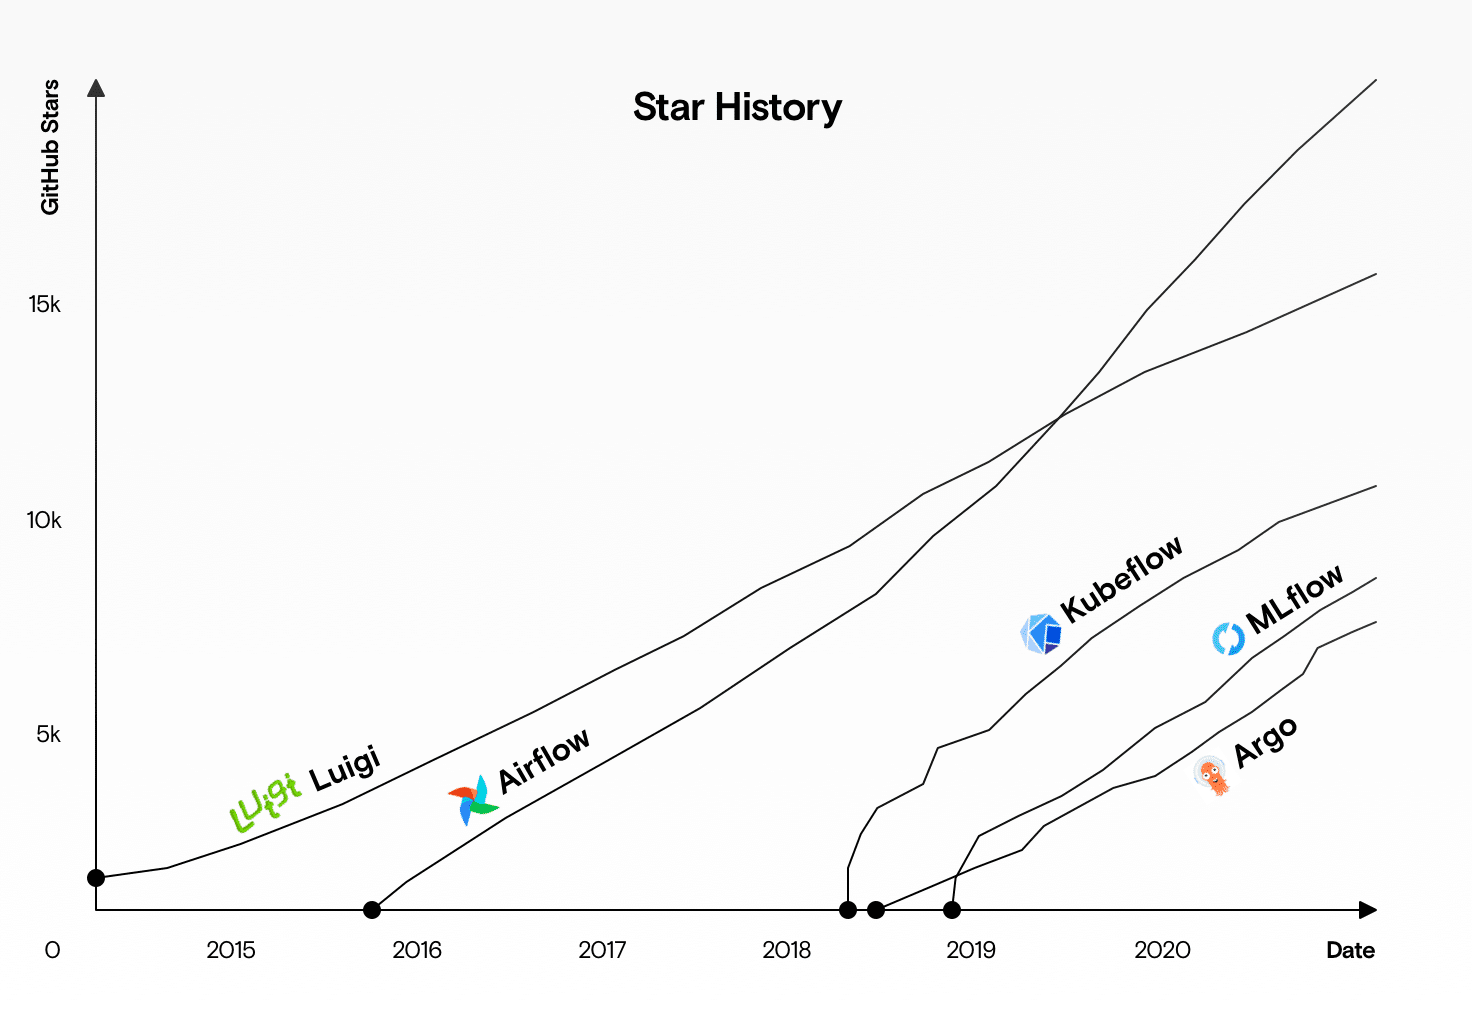 Star History of Workflow Management Tools